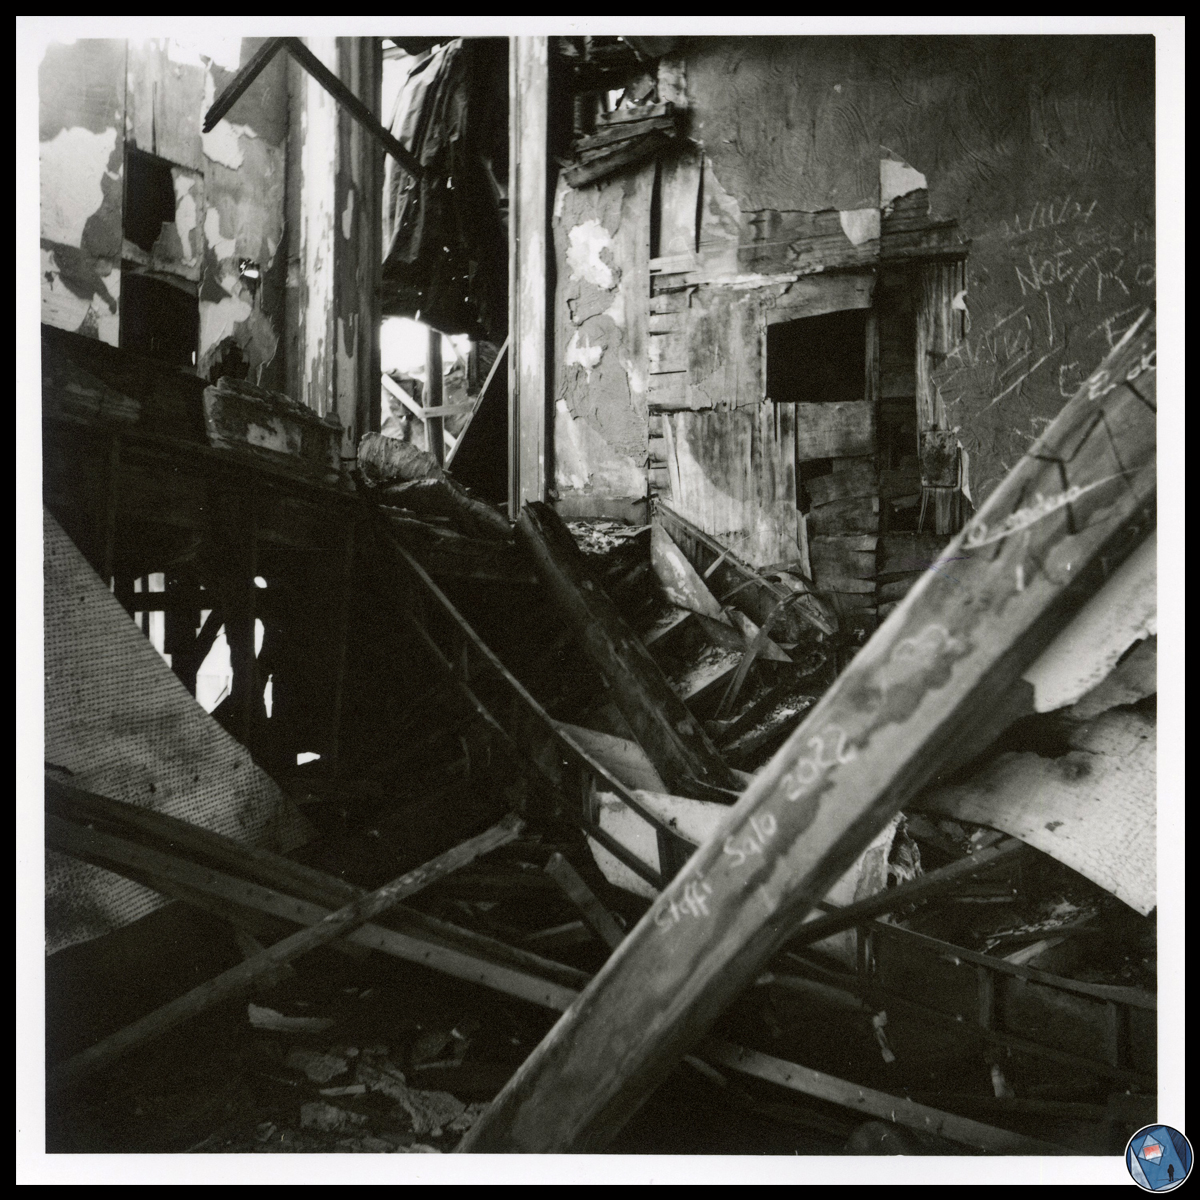 .
Harmless stuff
+ Destroyed Room, after Jeff Wall +
Abandoned movie set in the Tabernas Desert, Spain.
. 
#filmphotography
📷Yashica 635
🎞️Fomapan 100 developed in #caffenol
.
 12 x 12 cm
.
#fineart #photography #believeinfilm #bnwphotography #filmisnotdead #120film